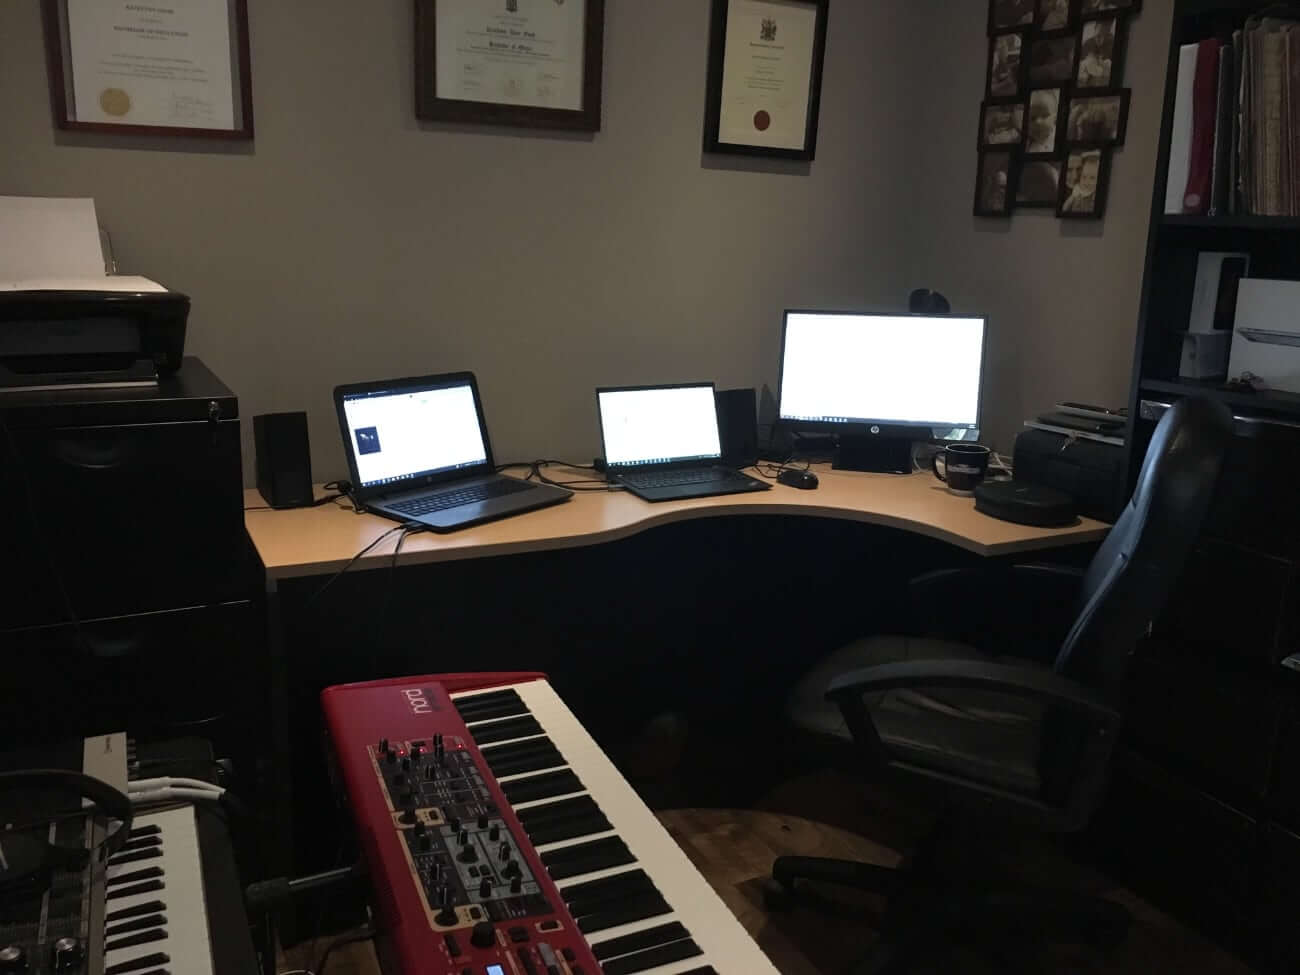 Image of Grant's desk and recording equipment